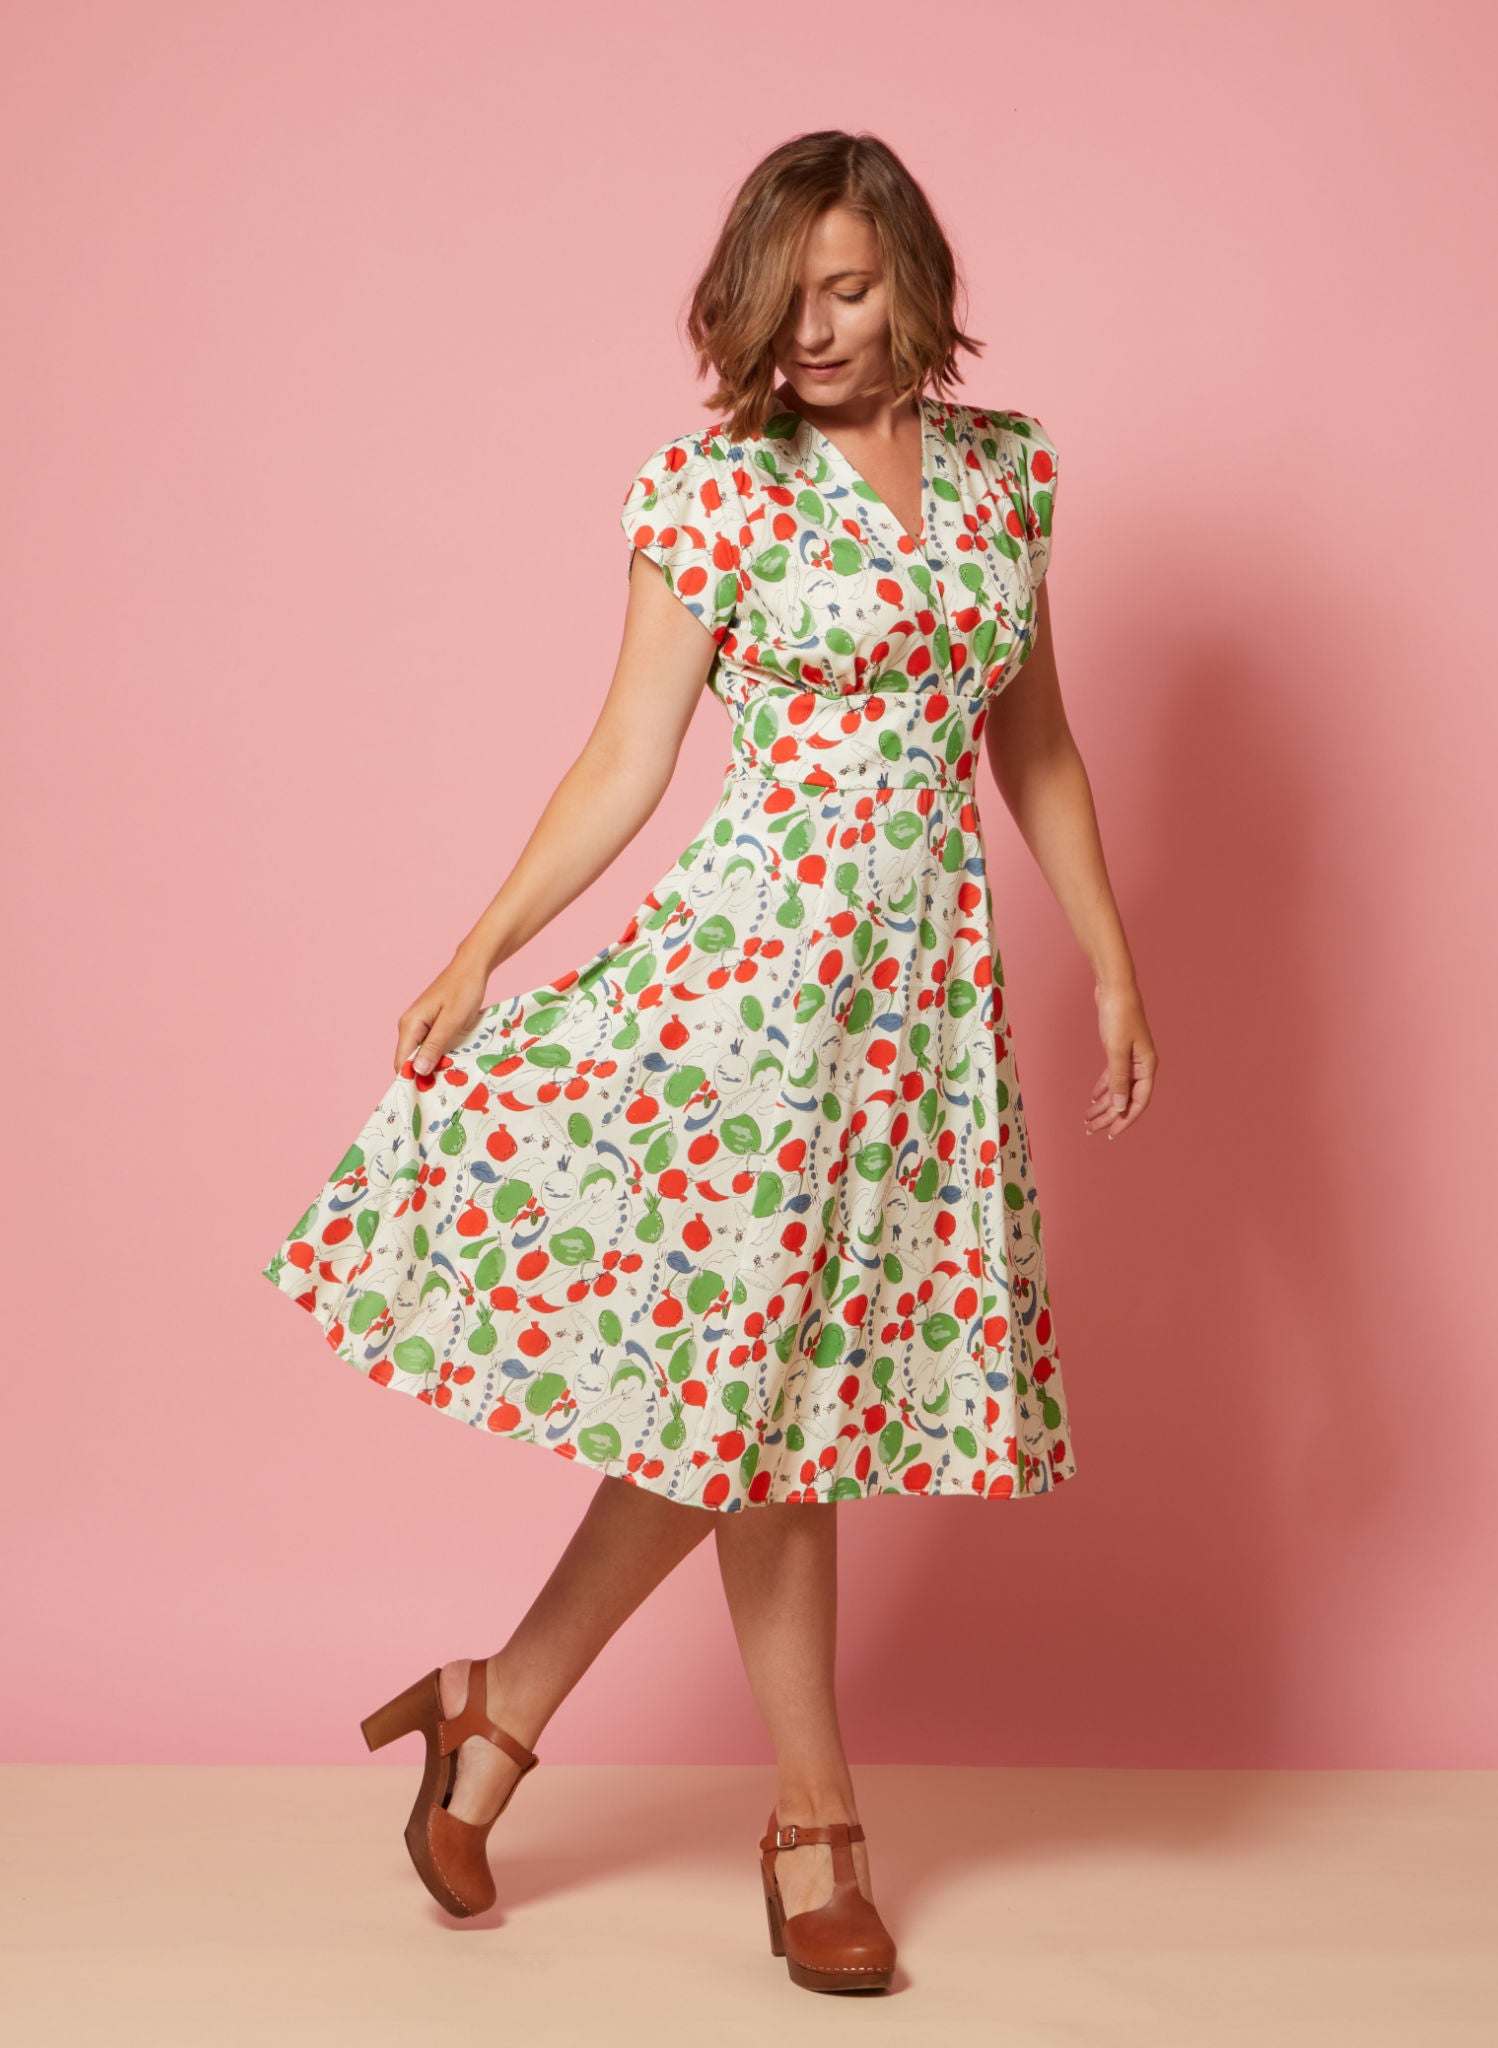 Cap sleeve 1940s style knee length summer dress with print of British garden vegetables